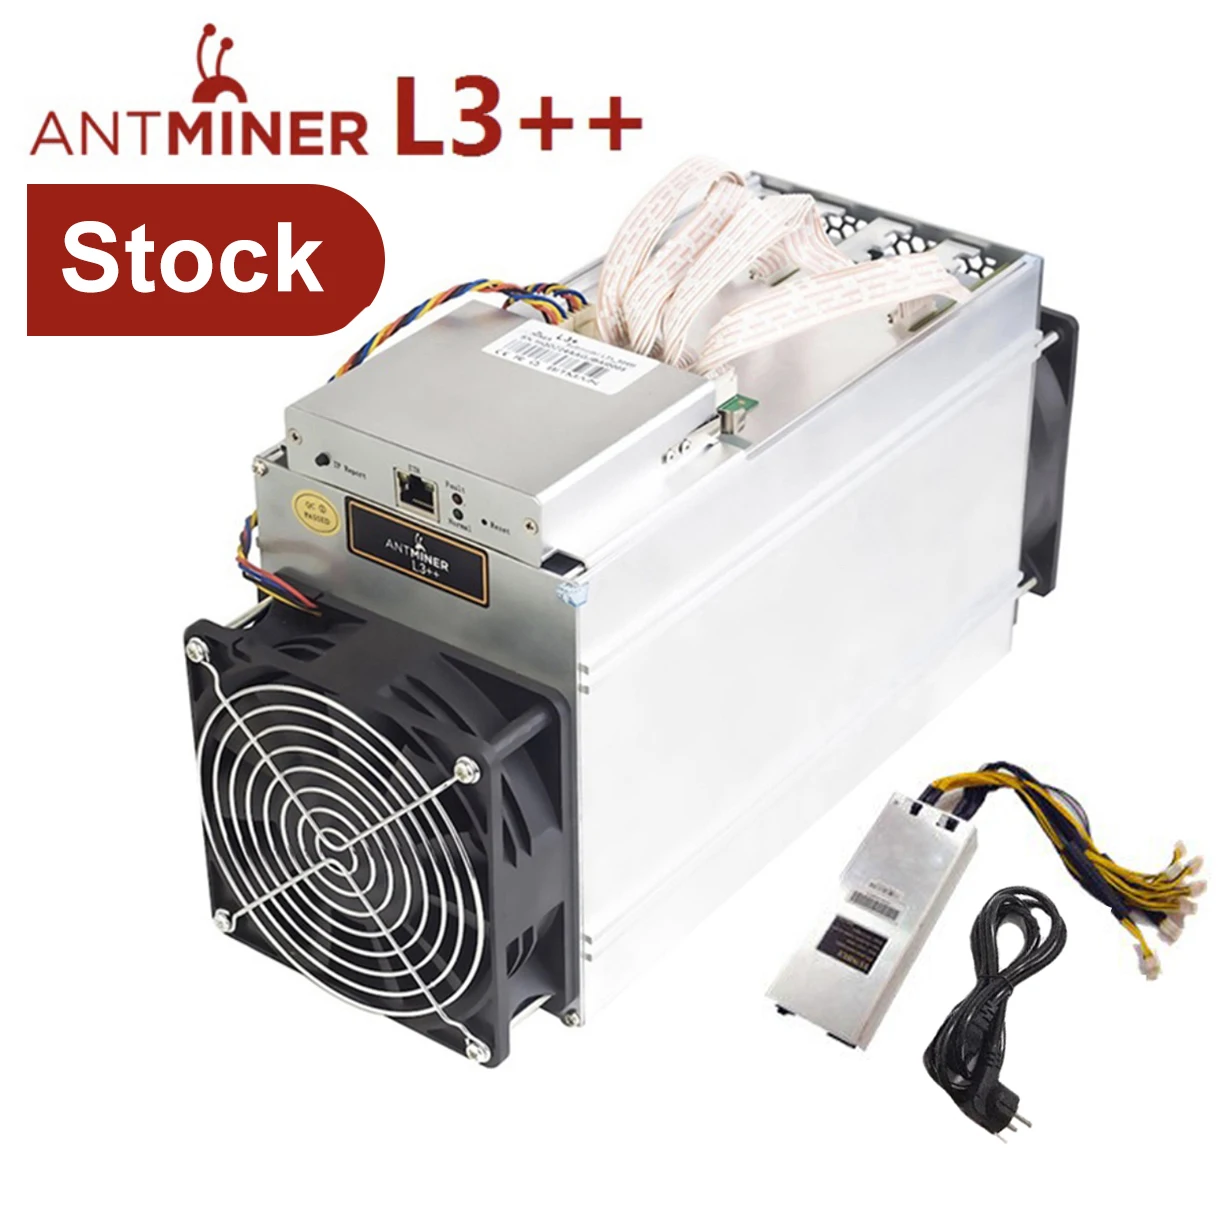 Bitmain Antminer L3++ mining profit calculator - WhatToMine